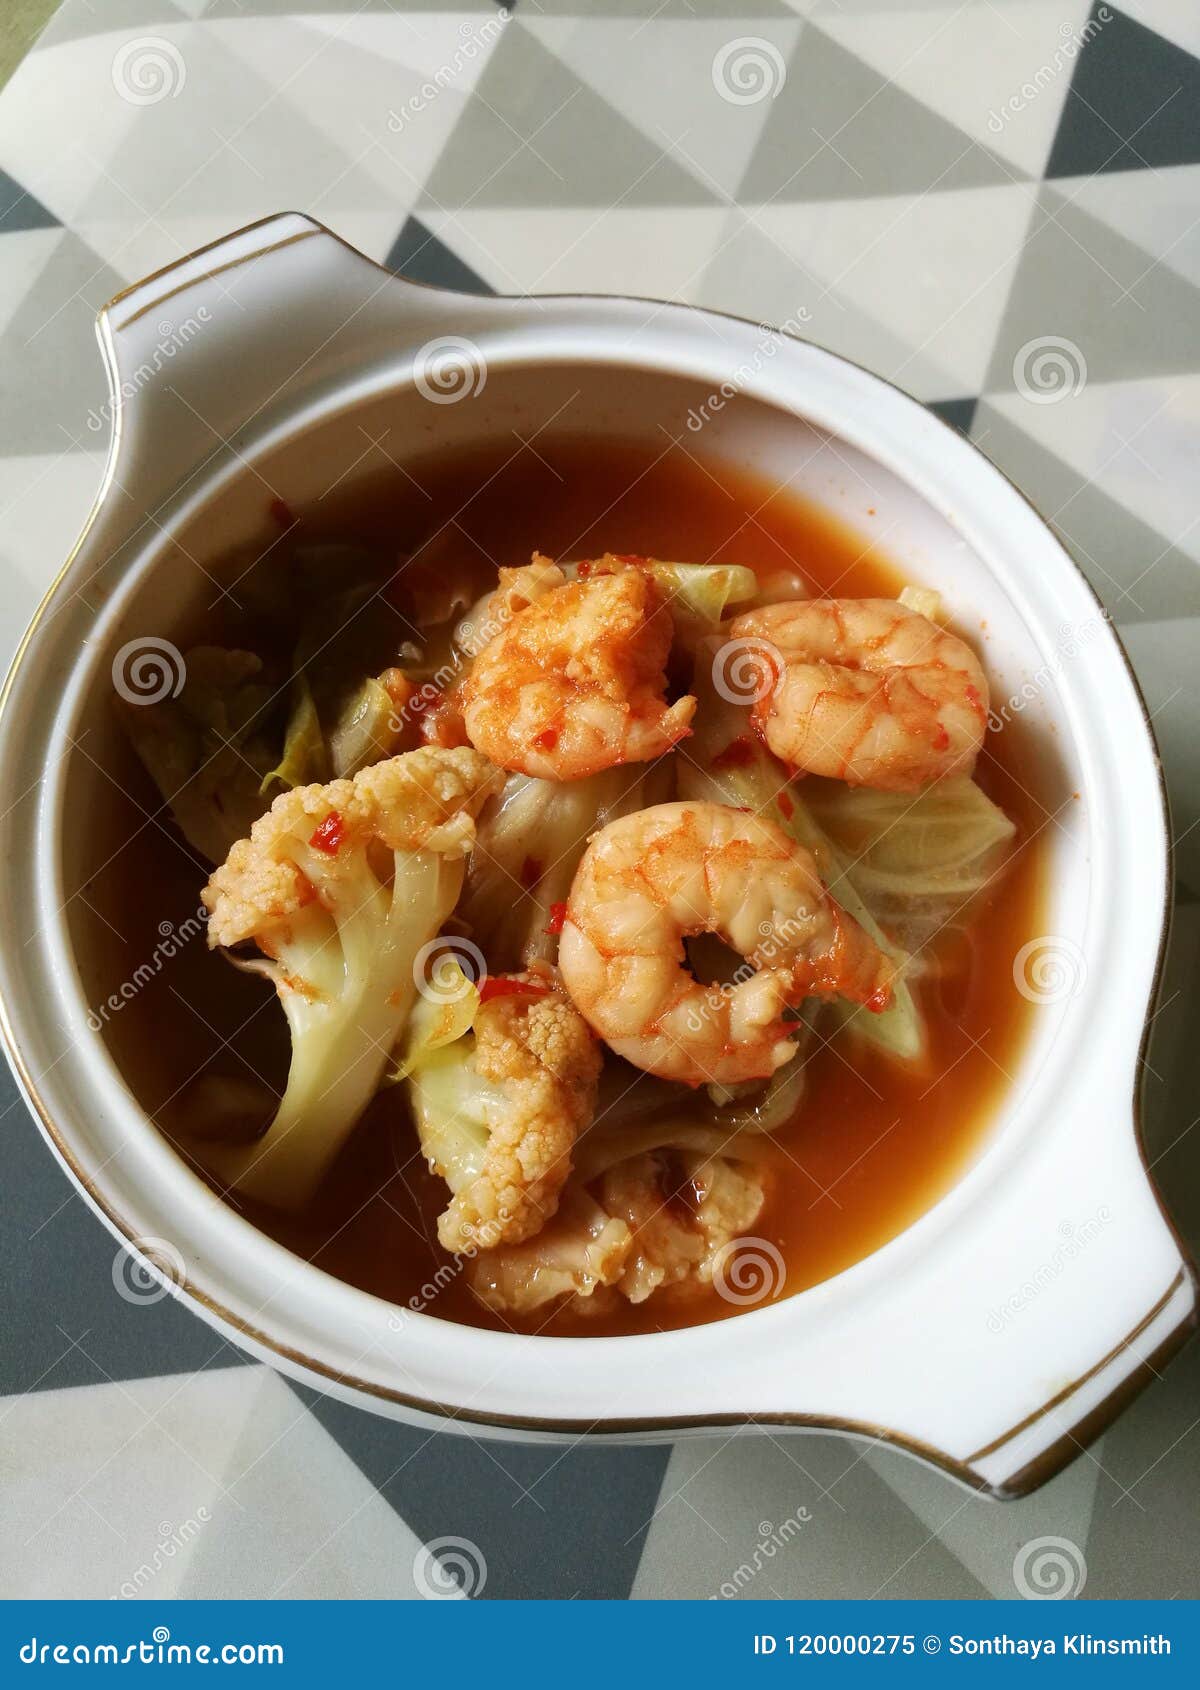 Sour Soup with Shrimp and Mixed Vegetable Stock Image - Image of ...